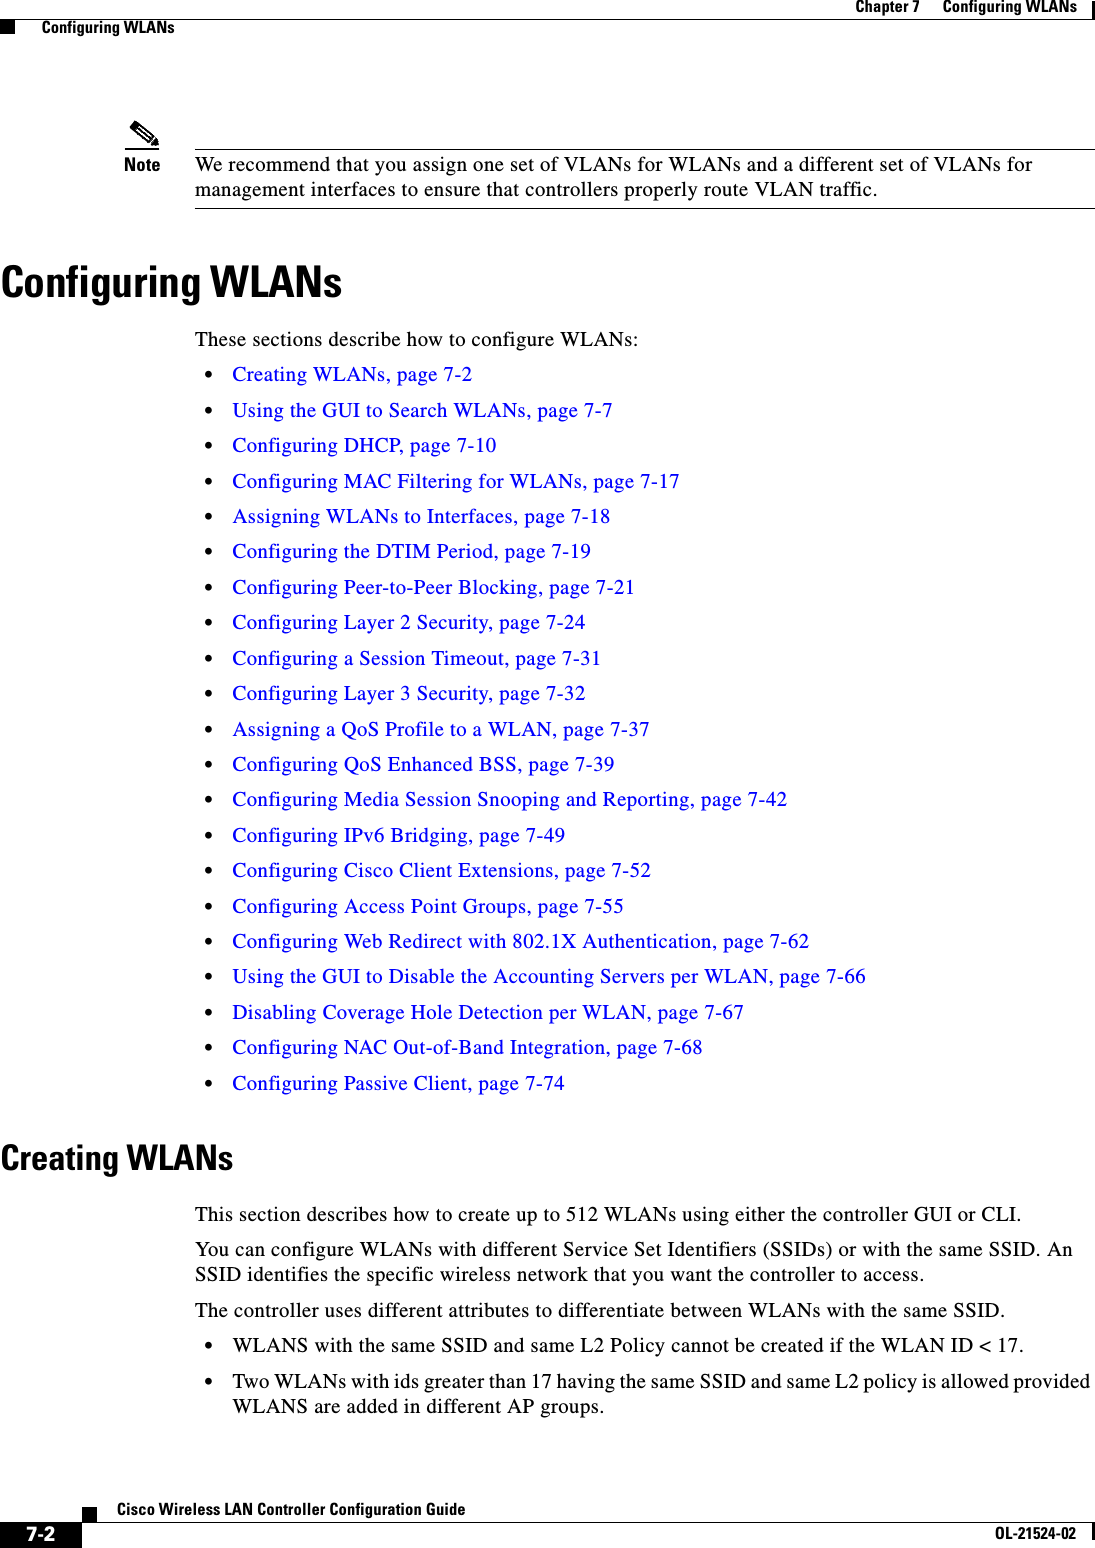  7-2Cisco Wireless LAN Controller Configuration GuideOL-21524-02Chapter 7      Configuring WLANs  Configuring WLANsNote We recommend that you assign one set of VLANs for WLANs and a different set of VLANs for management interfaces to ensure that controllers properly route VLAN traffic.Configuring WLANsThese sections describe how to configure WLANs:  • Creating WLANs, page 7-2  • Using the GUI to Search WLANs, page 7-7  • Configuring DHCP, page 7-10  • Configuring MAC Filtering for WLANs, page 7-17  • Assigning WLANs to Interfaces, page 7-18  • Configuring the DTIM Period, page 7-19  • Configuring Peer-to-Peer Blocking, page 7-21  • Configuring Layer 2 Security, page 7-24  • Configuring a Session Timeout, page 7-31  • Configuring Layer 3 Security, page 7-32  • Assigning a QoS Profile to a WLAN, page 7-37  • Configuring QoS Enhanced BSS, page 7-39  • Configuring Media Session Snooping and Reporting, page 7-42  • Configuring IPv6 Bridging, page 7-49  • Configuring Cisco Client Extensions, page 7-52  • Configuring Access Point Groups, page 7-55  • Configuring Web Redirect with 802.1X Authentication, page 7-62  • Using the GUI to Disable the Accounting Servers per WLAN, page 7-66  • Disabling Coverage Hole Detection per WLAN, page 7-67  • Configuring NAC Out-of-Band Integration, page 7-68  • Configuring Passive Client, page 7-74Creating WLANsThis section describes how to create up to 512 WLANs using either the controller GUI or CLI.You can configure WLANs with different Service Set Identifiers (SSIDs) or with the same SSID. An SSID identifies the specific wireless network that you want the controller to access. The controller uses different attributes to differentiate between WLANs with the same SSID.  • WLANS with the same SSID and same L2 Policy cannot be created if the WLAN ID &lt; 17.  • Two WLANs with ids greater than 17 having the same SSID and same L2 policy is allowed provided WLANS are added in different AP groups.